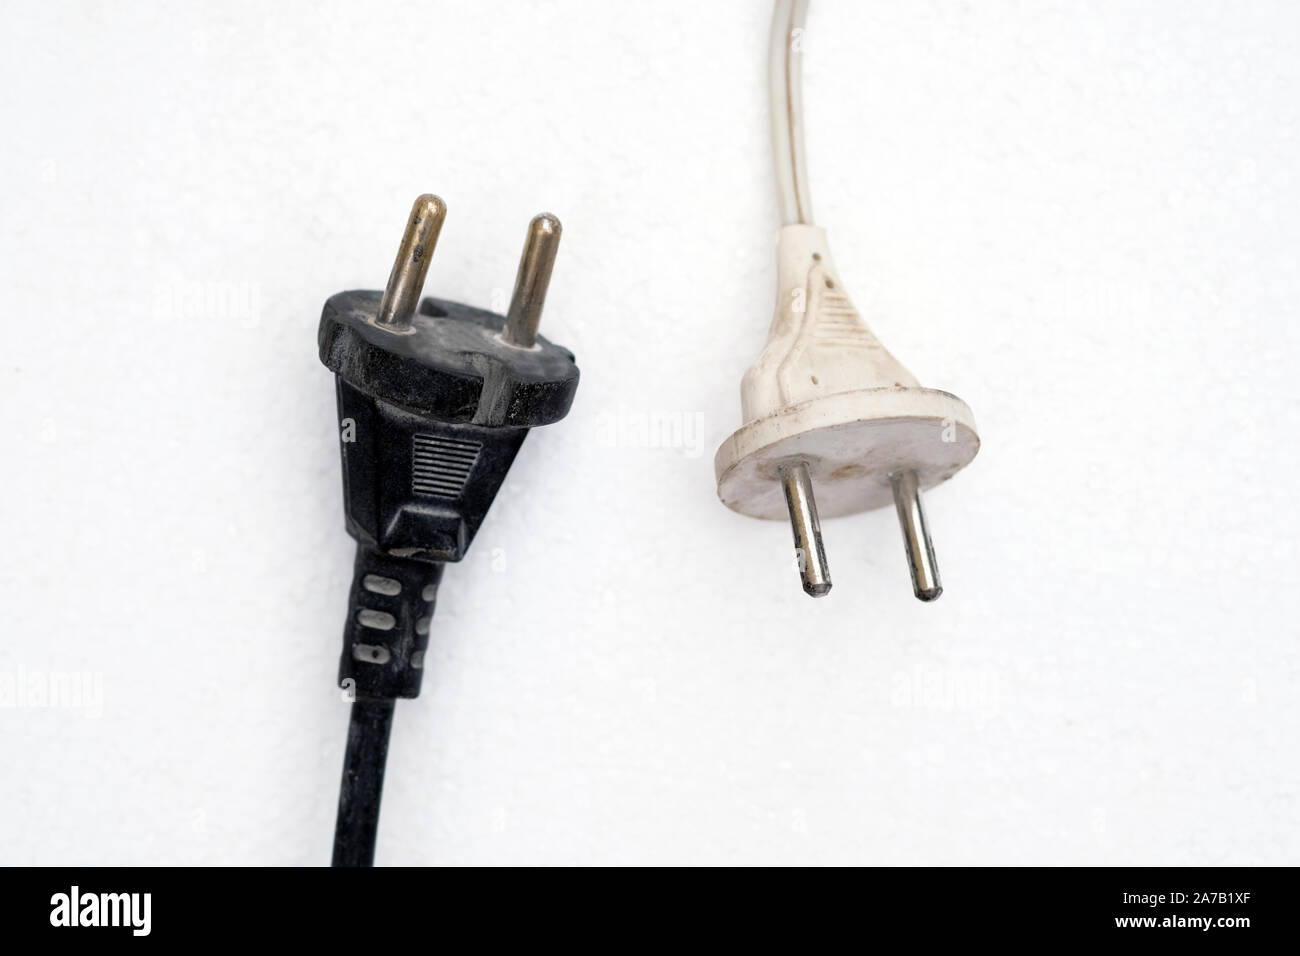 Two electric plugs close up. White and black electric plugs with wires on a white background. Old electric plugs with cords. Stock Photo